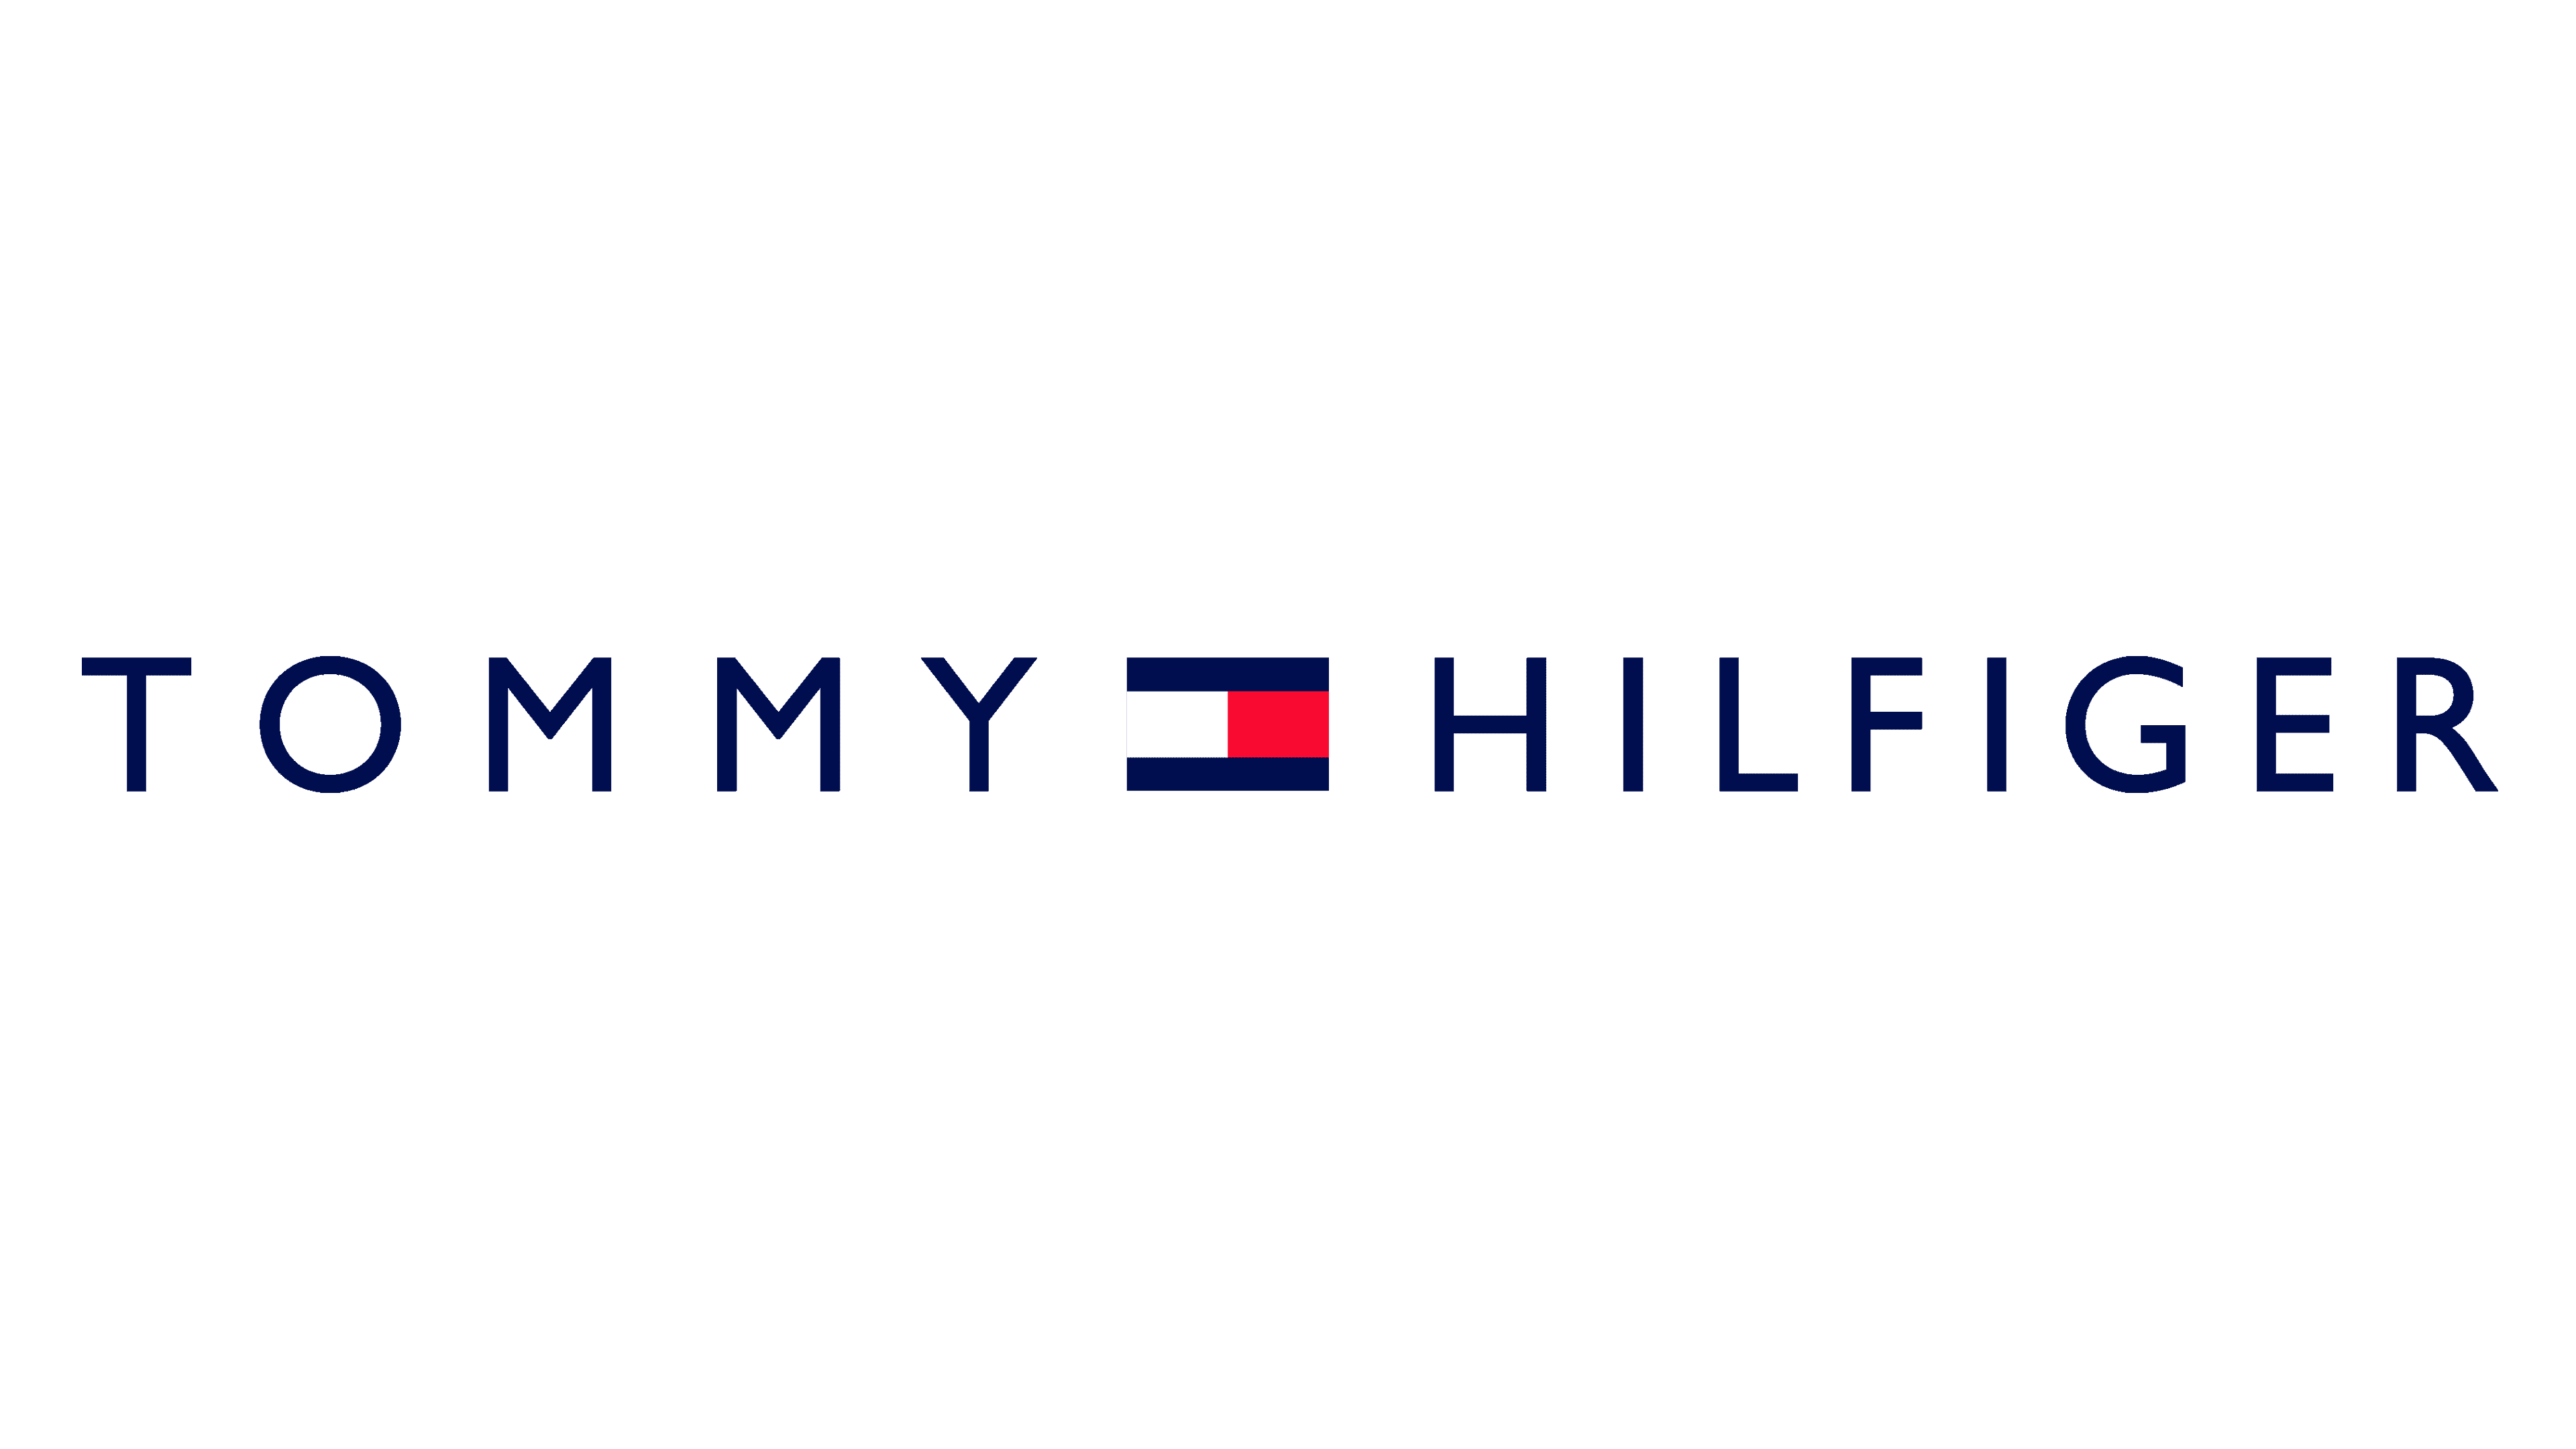 TOMMY HILIFIGER